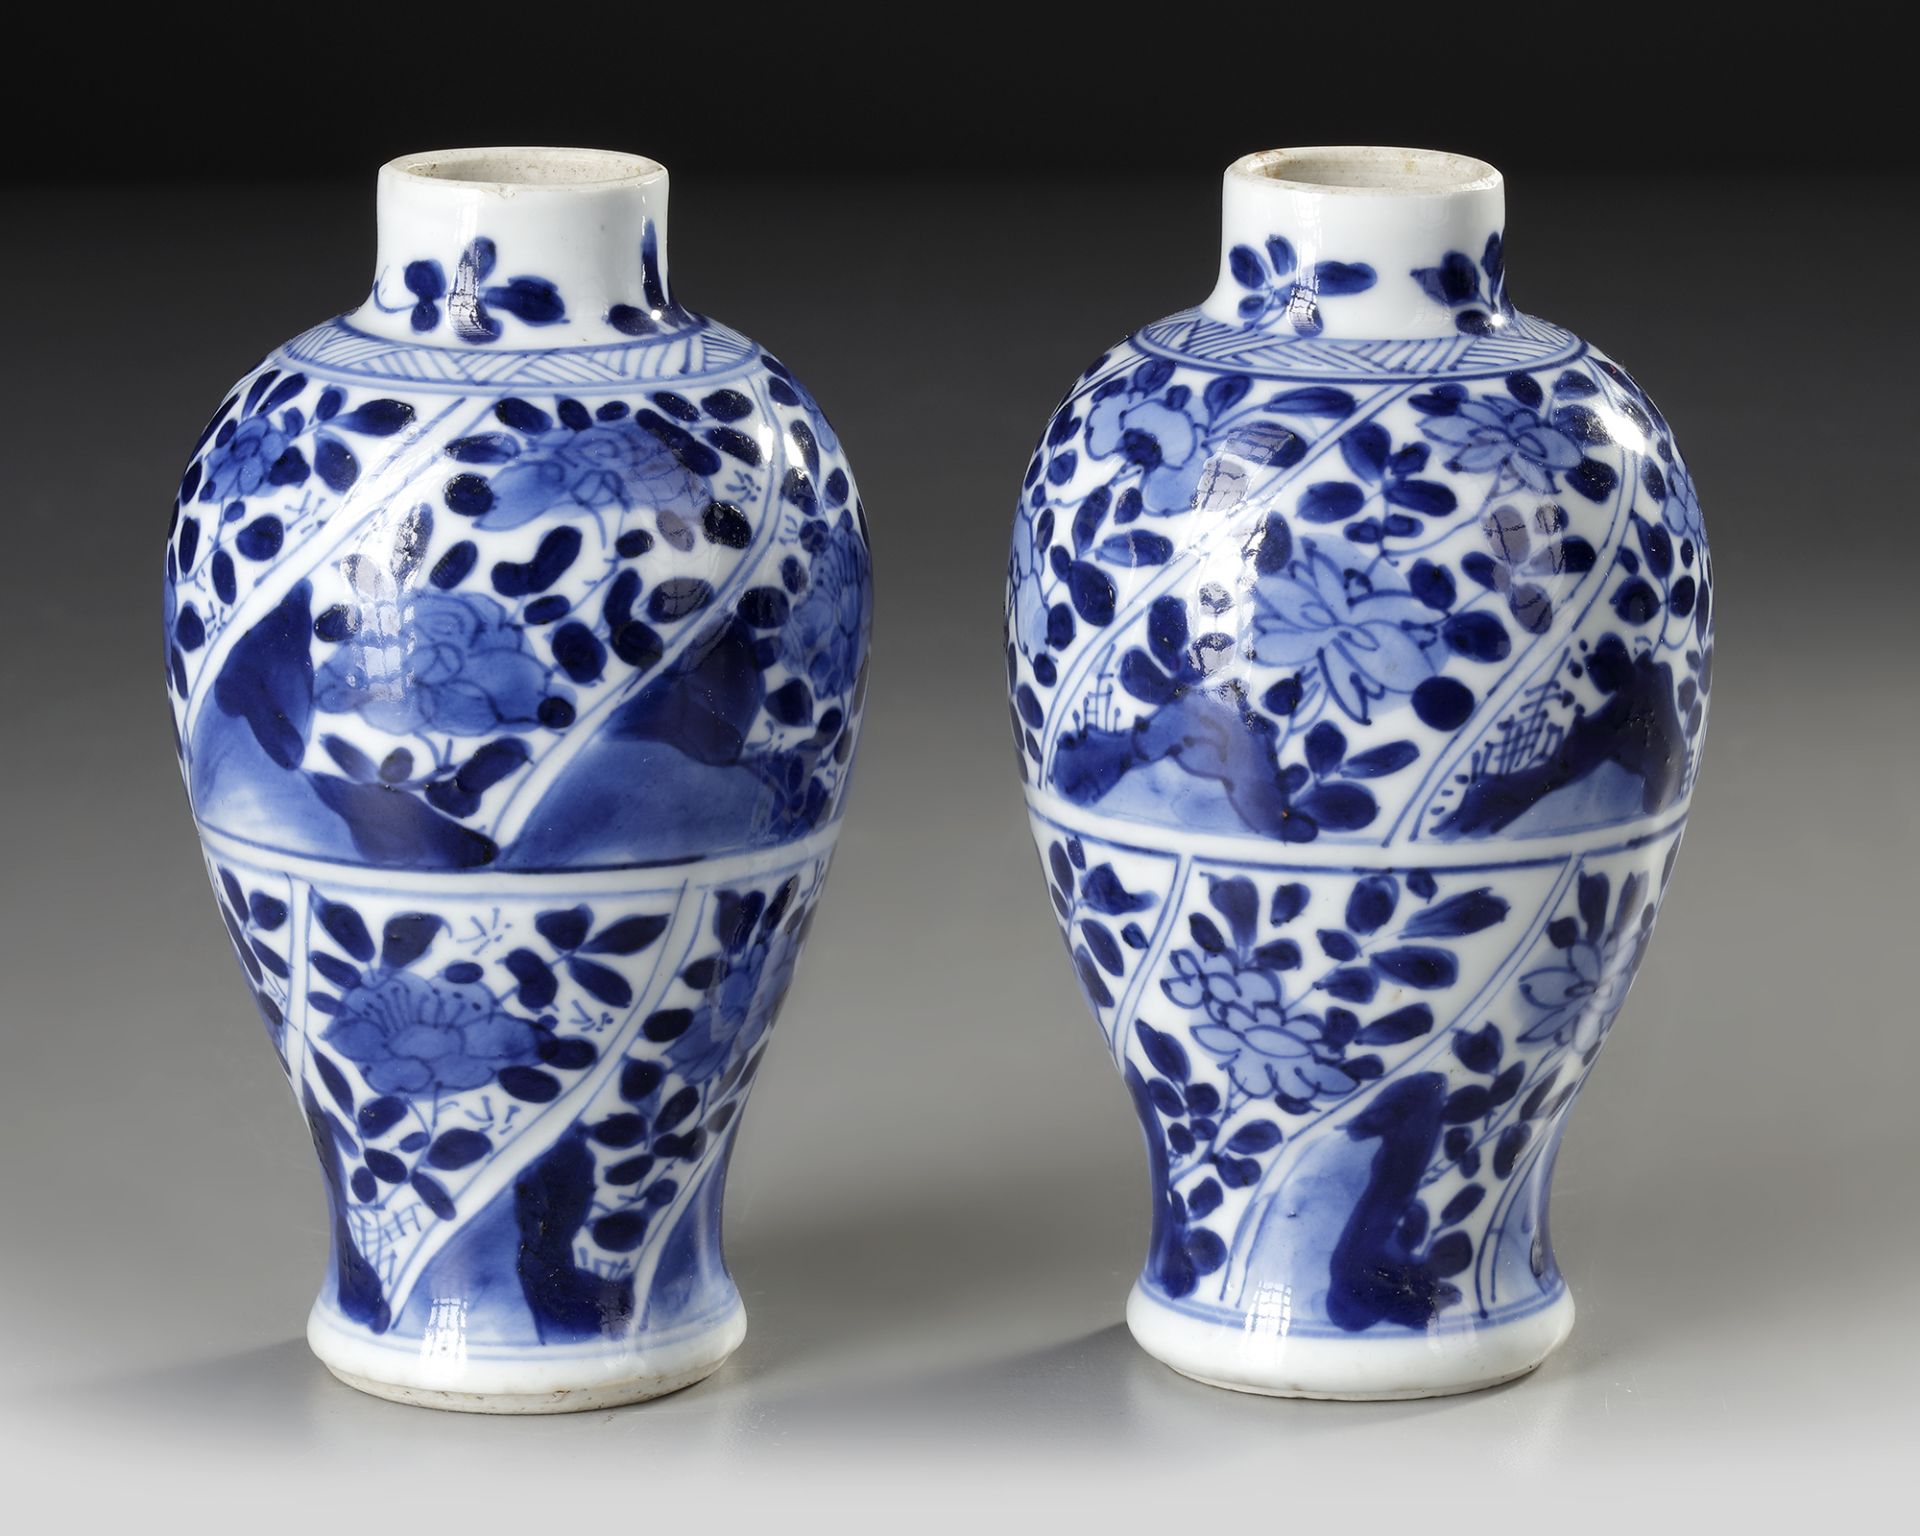 A PAIR OF CHINESE BLUE AND WHITE VASES, KANGXI PERIOD (1662-1722) - Image 2 of 4